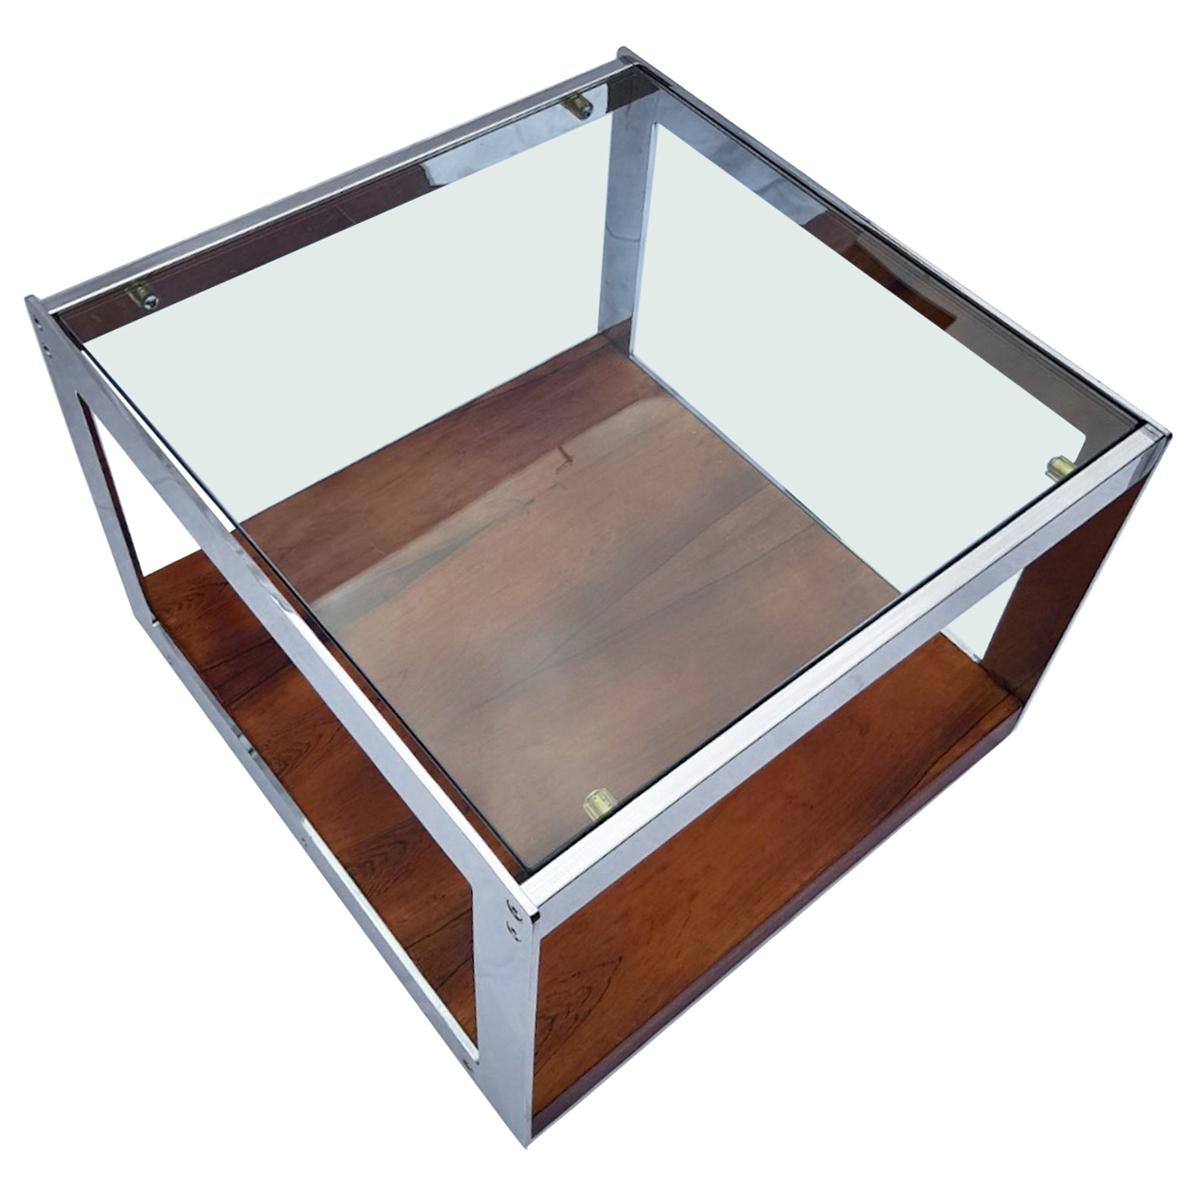 Merrow Associates Rosewood and Chrome Side Table by Richard Young, 1970s